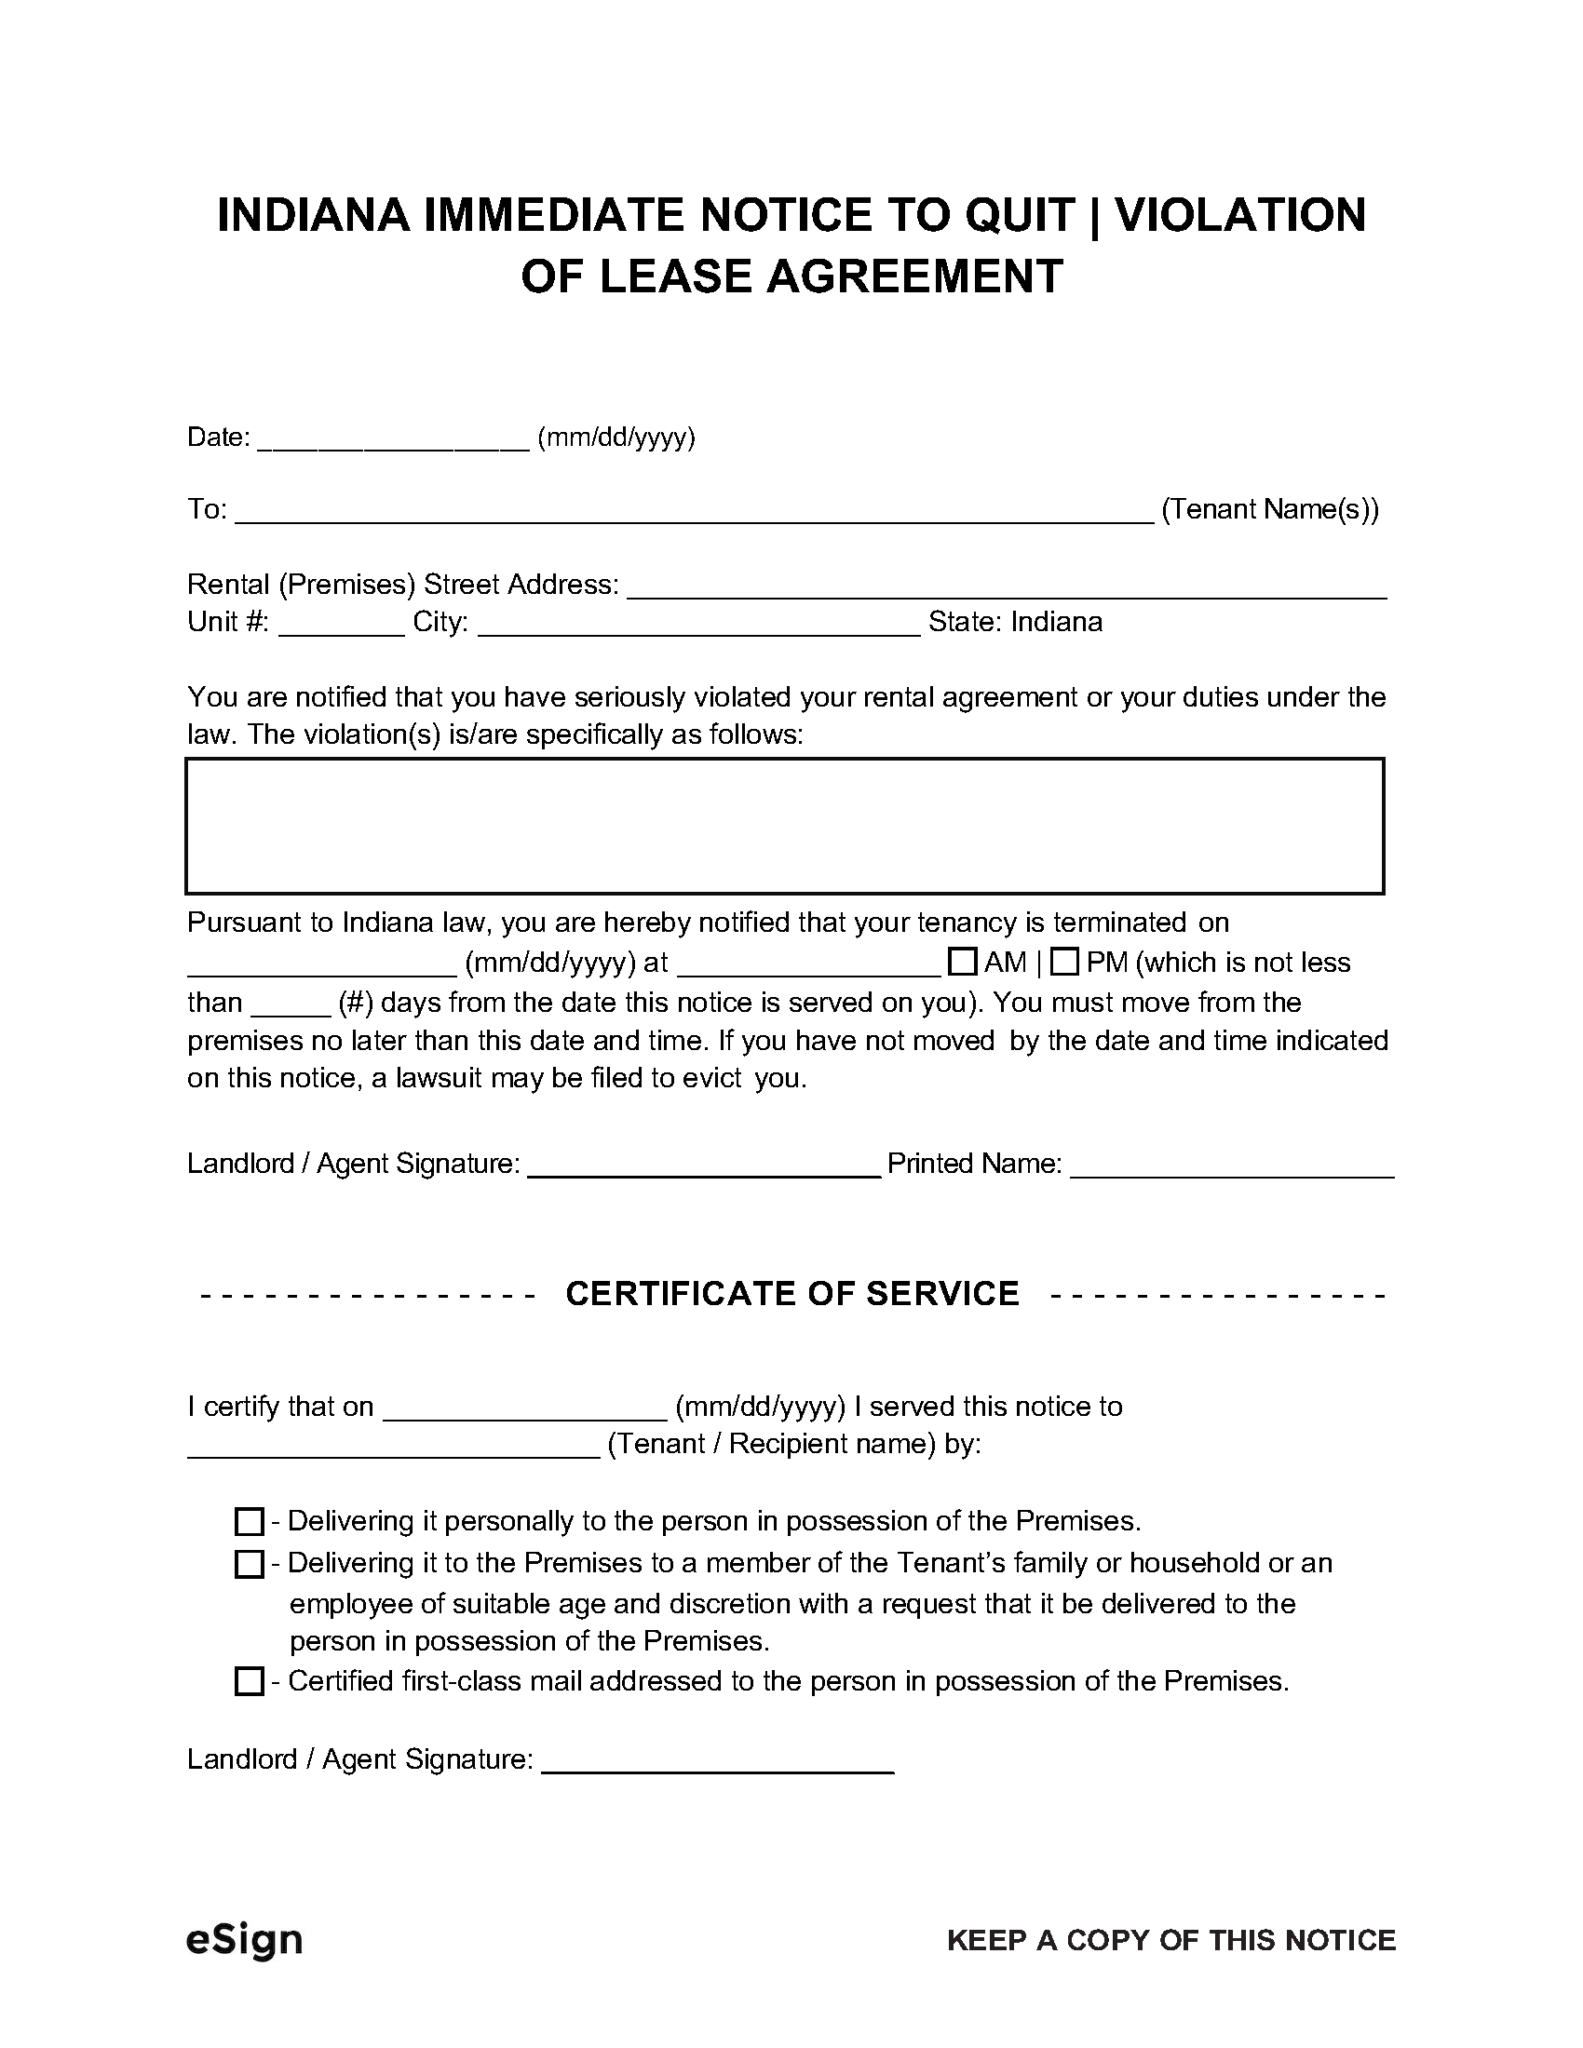 Free Indiana Eviction Notice Templates Laws PDF Word